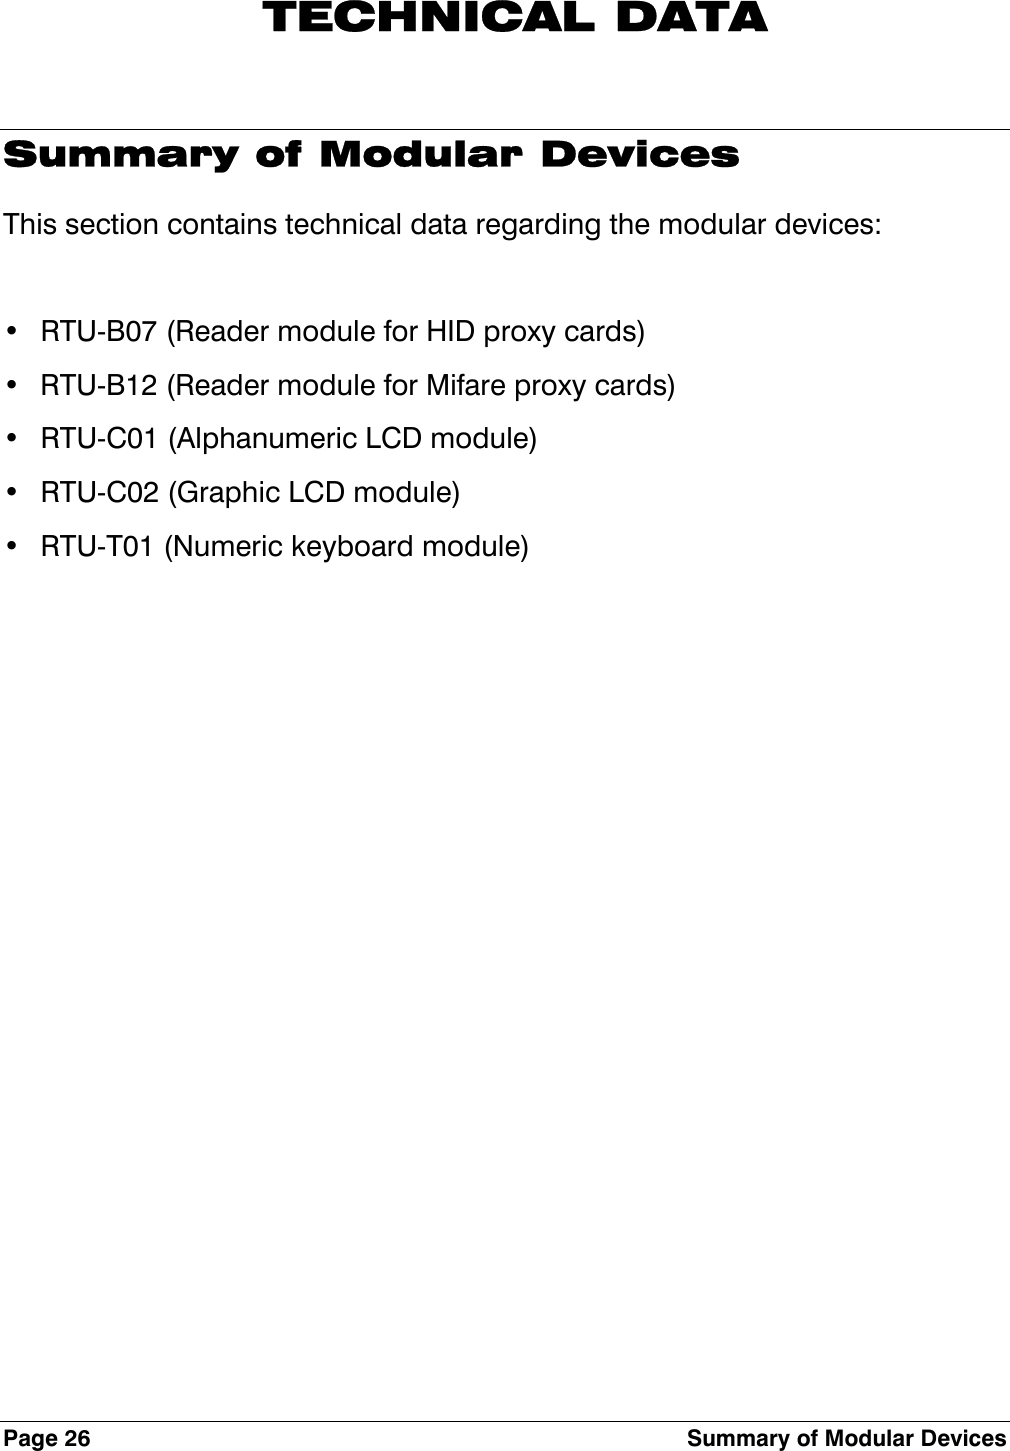 Page 26  Summary of Modular Devices  TECHNICAL DATA Summary of Modular Devices This section contains technical data regarding the modular devices:  •  RTU-B07 (Reader module for HID proxy cards) •  RTU-B12 (Reader module for Mifare proxy cards) •  RTU-C01 (Alphanumeric LCD module) •  RTU-C02 (Graphic LCD module) •  RTU-T01 (Numeric keyboard module) 